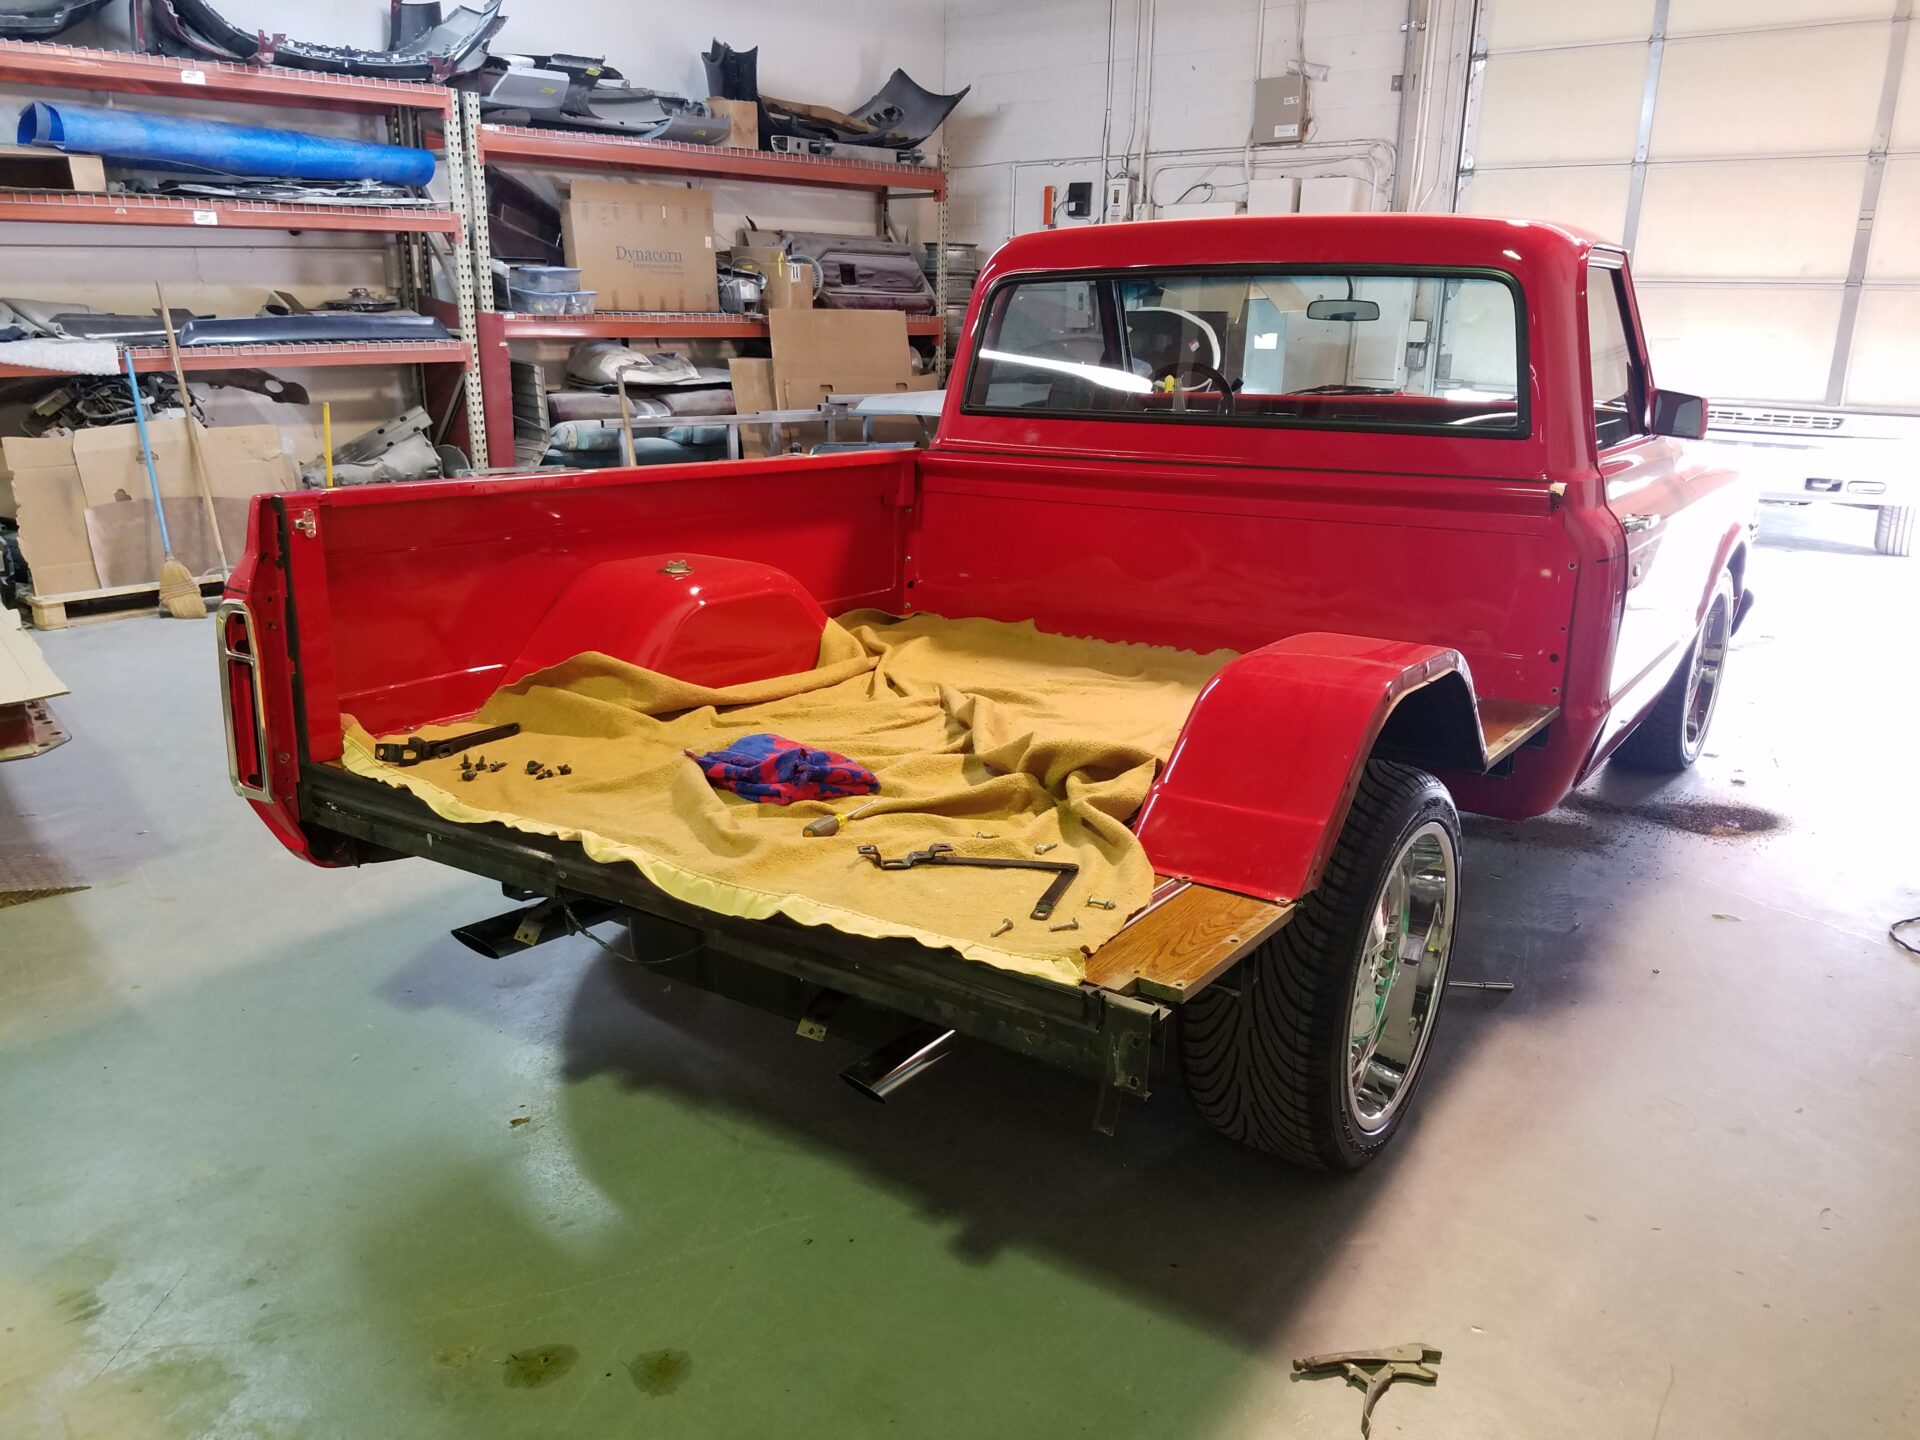 Removing the damaged 1968 Chevy C10 part